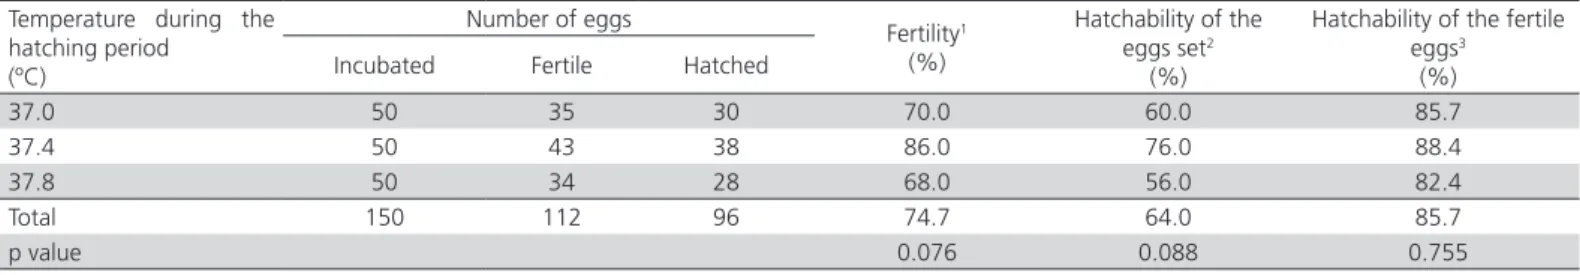 Table 2 – Egg weight losses during incubation in red-legged partridge fertile eggs according to incubation temperature  during the hatching phase (mean±standard error of the mean).